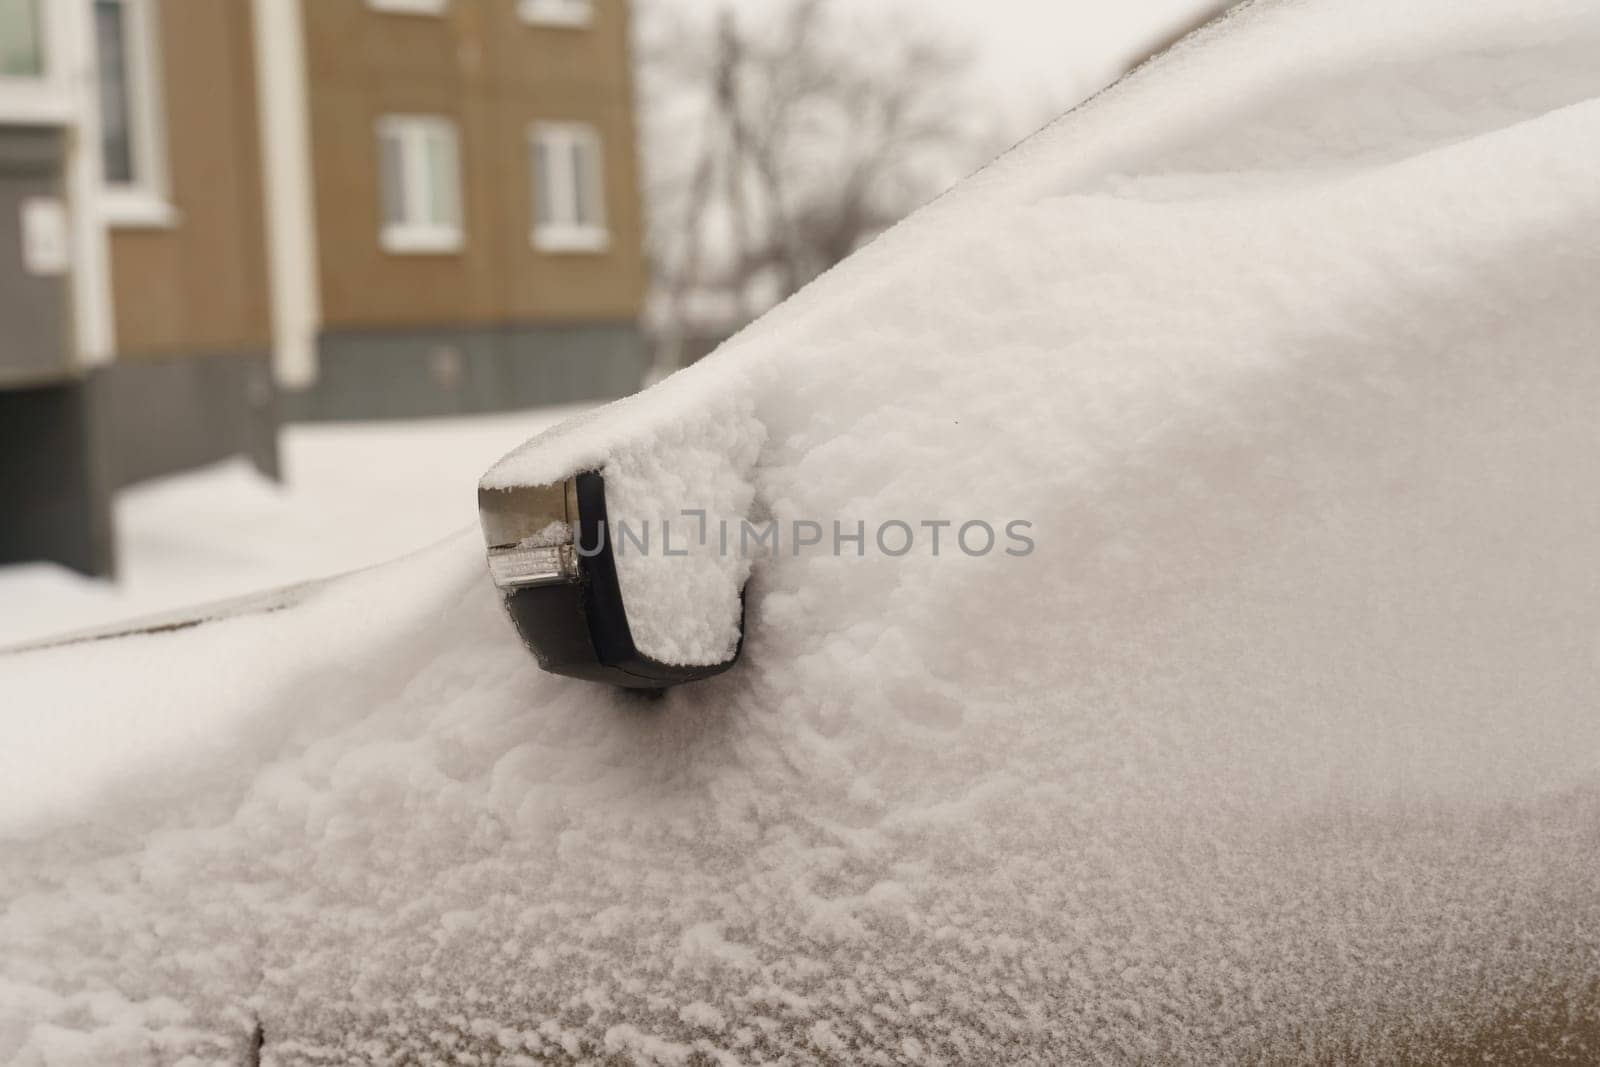 Snow-covered car mirror in bad weather. by Sd28DimoN_1976